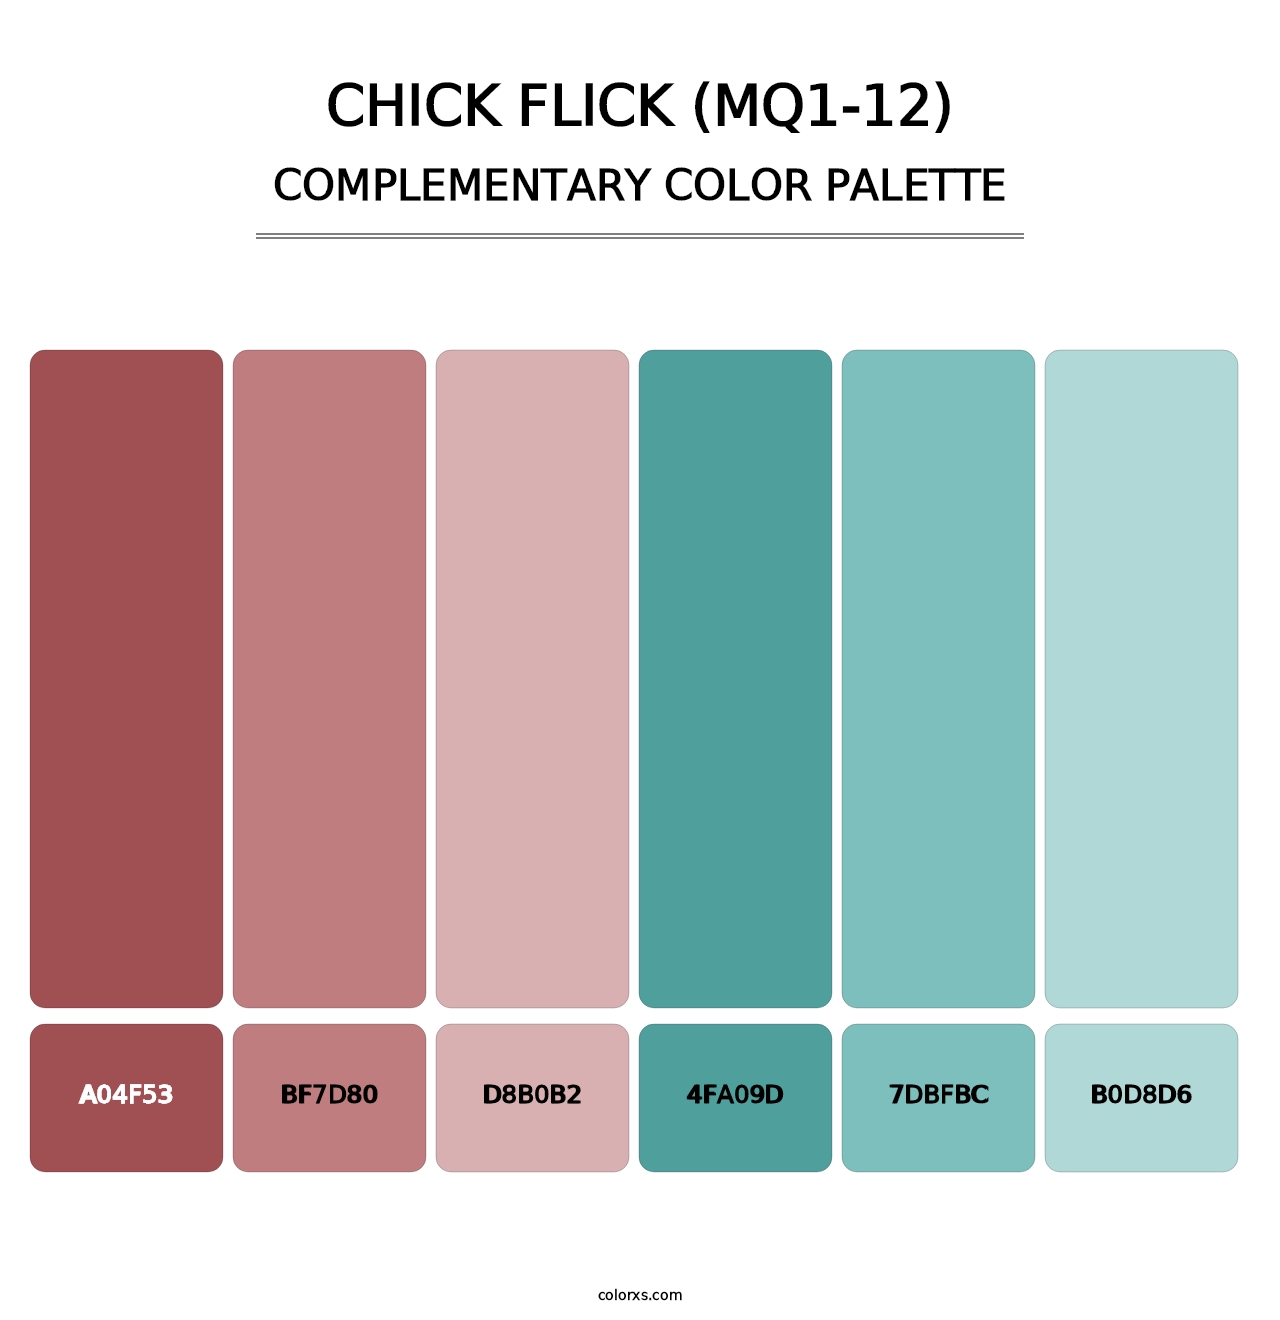 Chick Flick (MQ1-12) - Complementary Color Palette